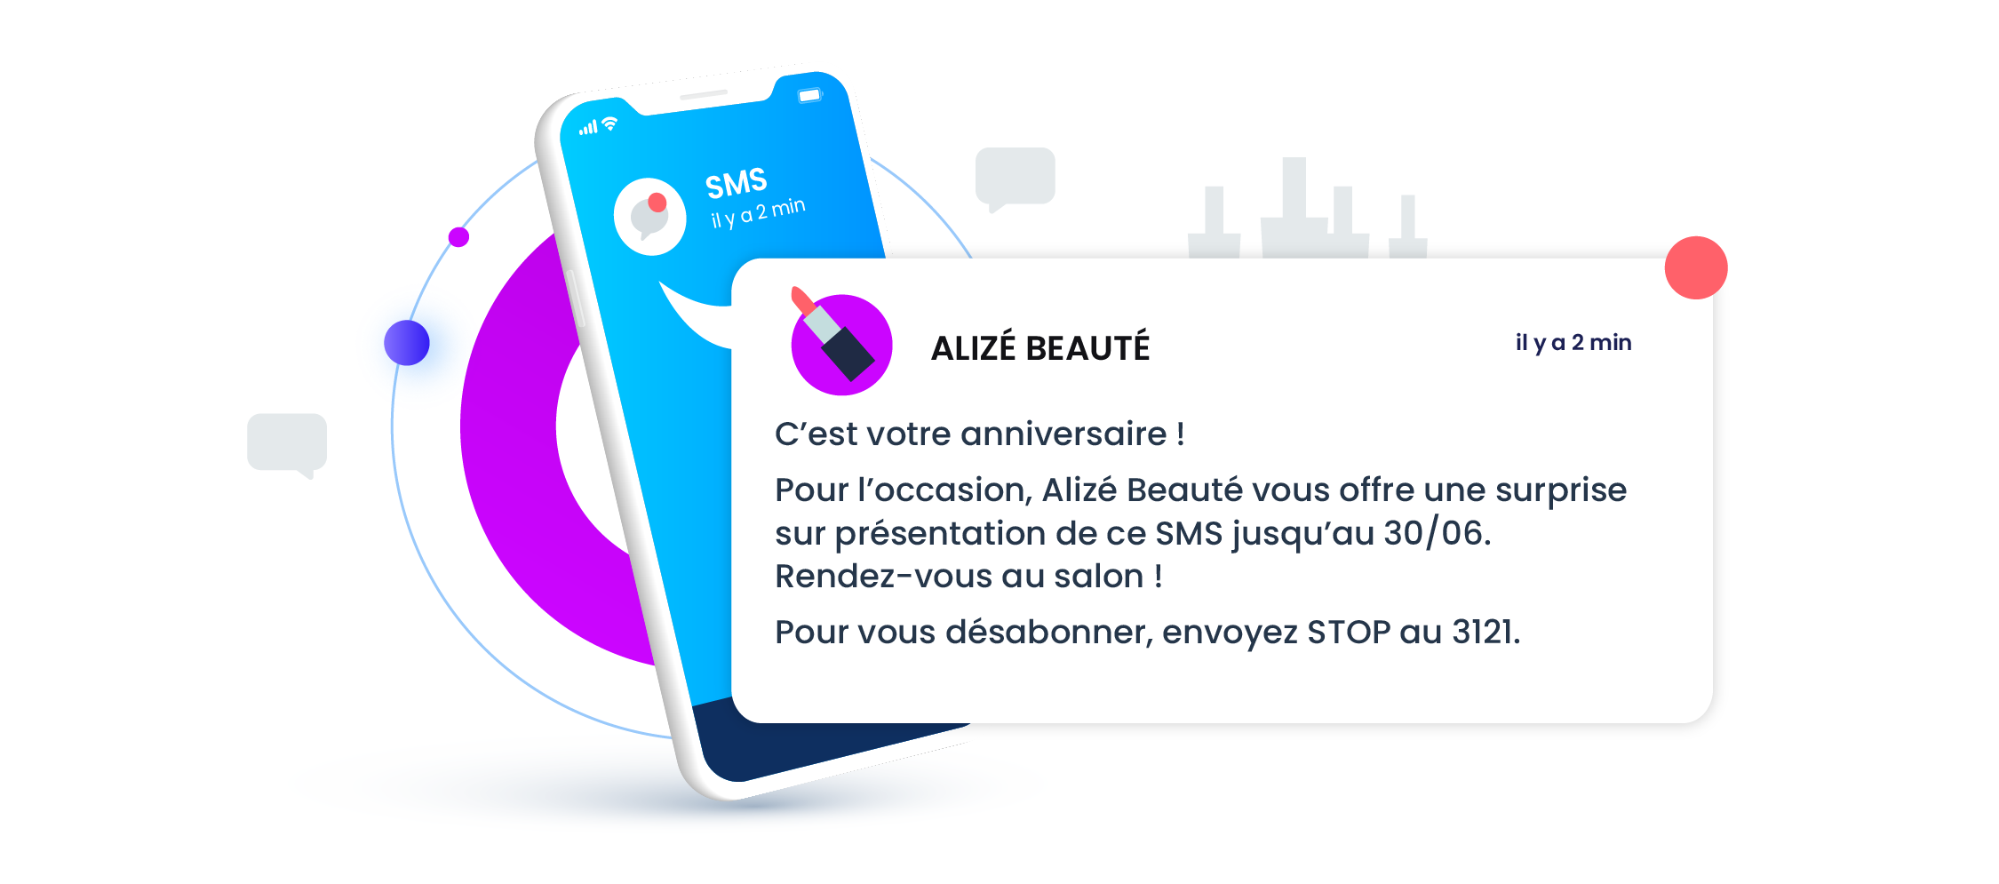 SMS - Alize beaute